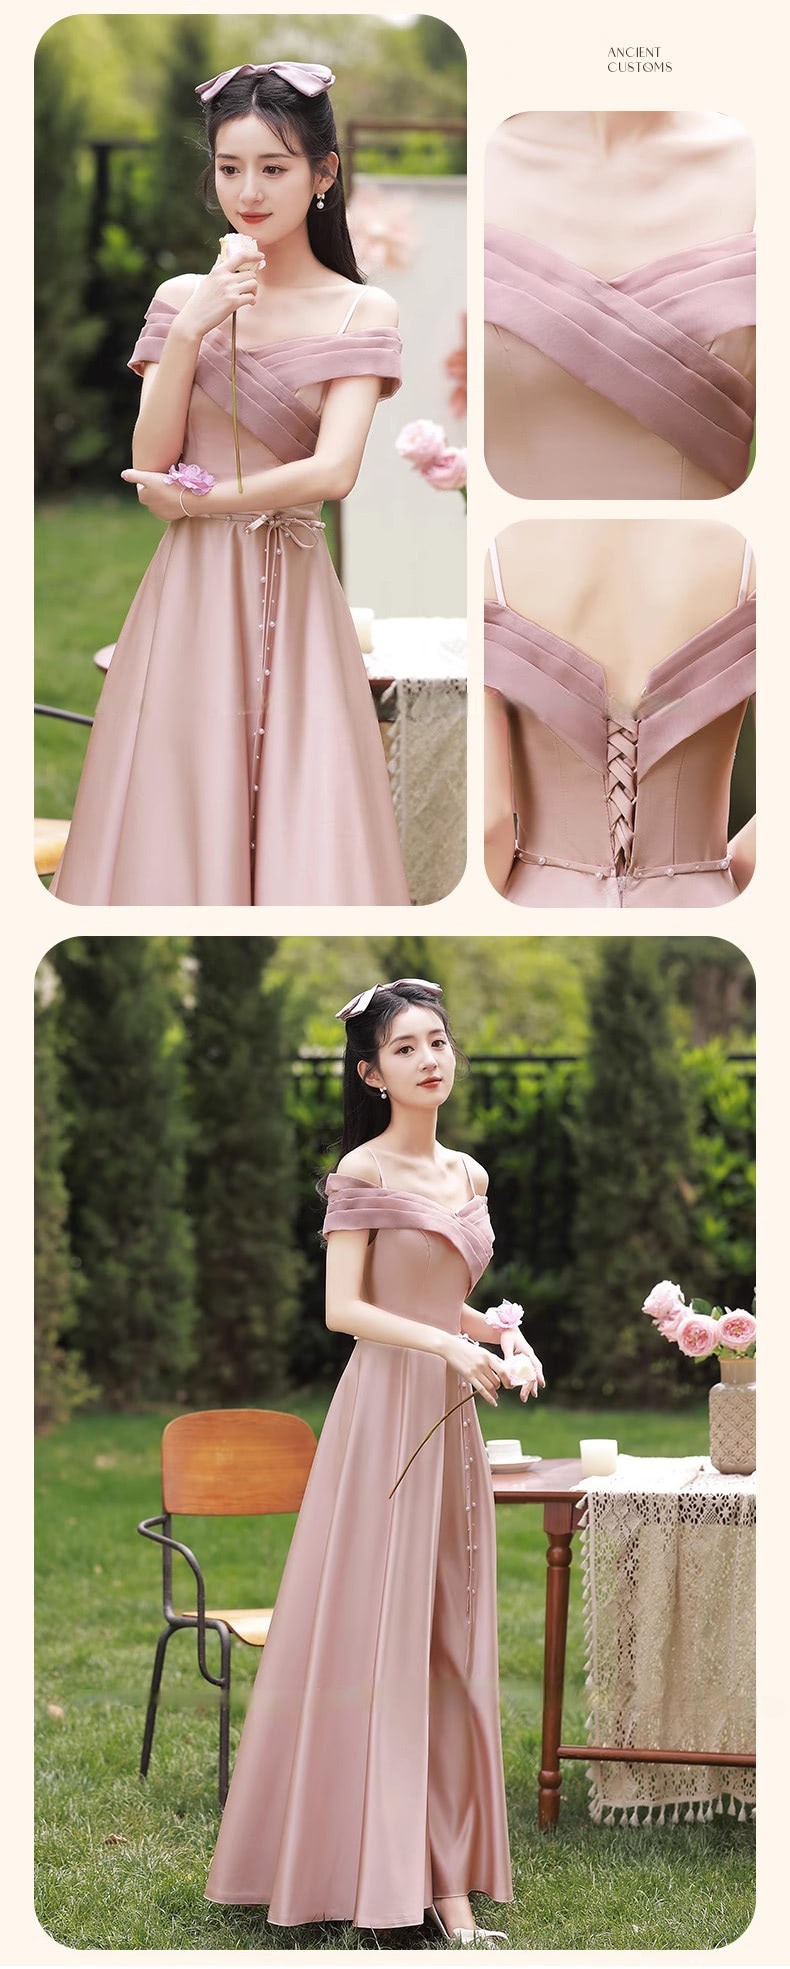 Sweet-Pink-Satin-Bridesmaid-Dress-Wedding-Prom-Guest-Formal-Outfit20